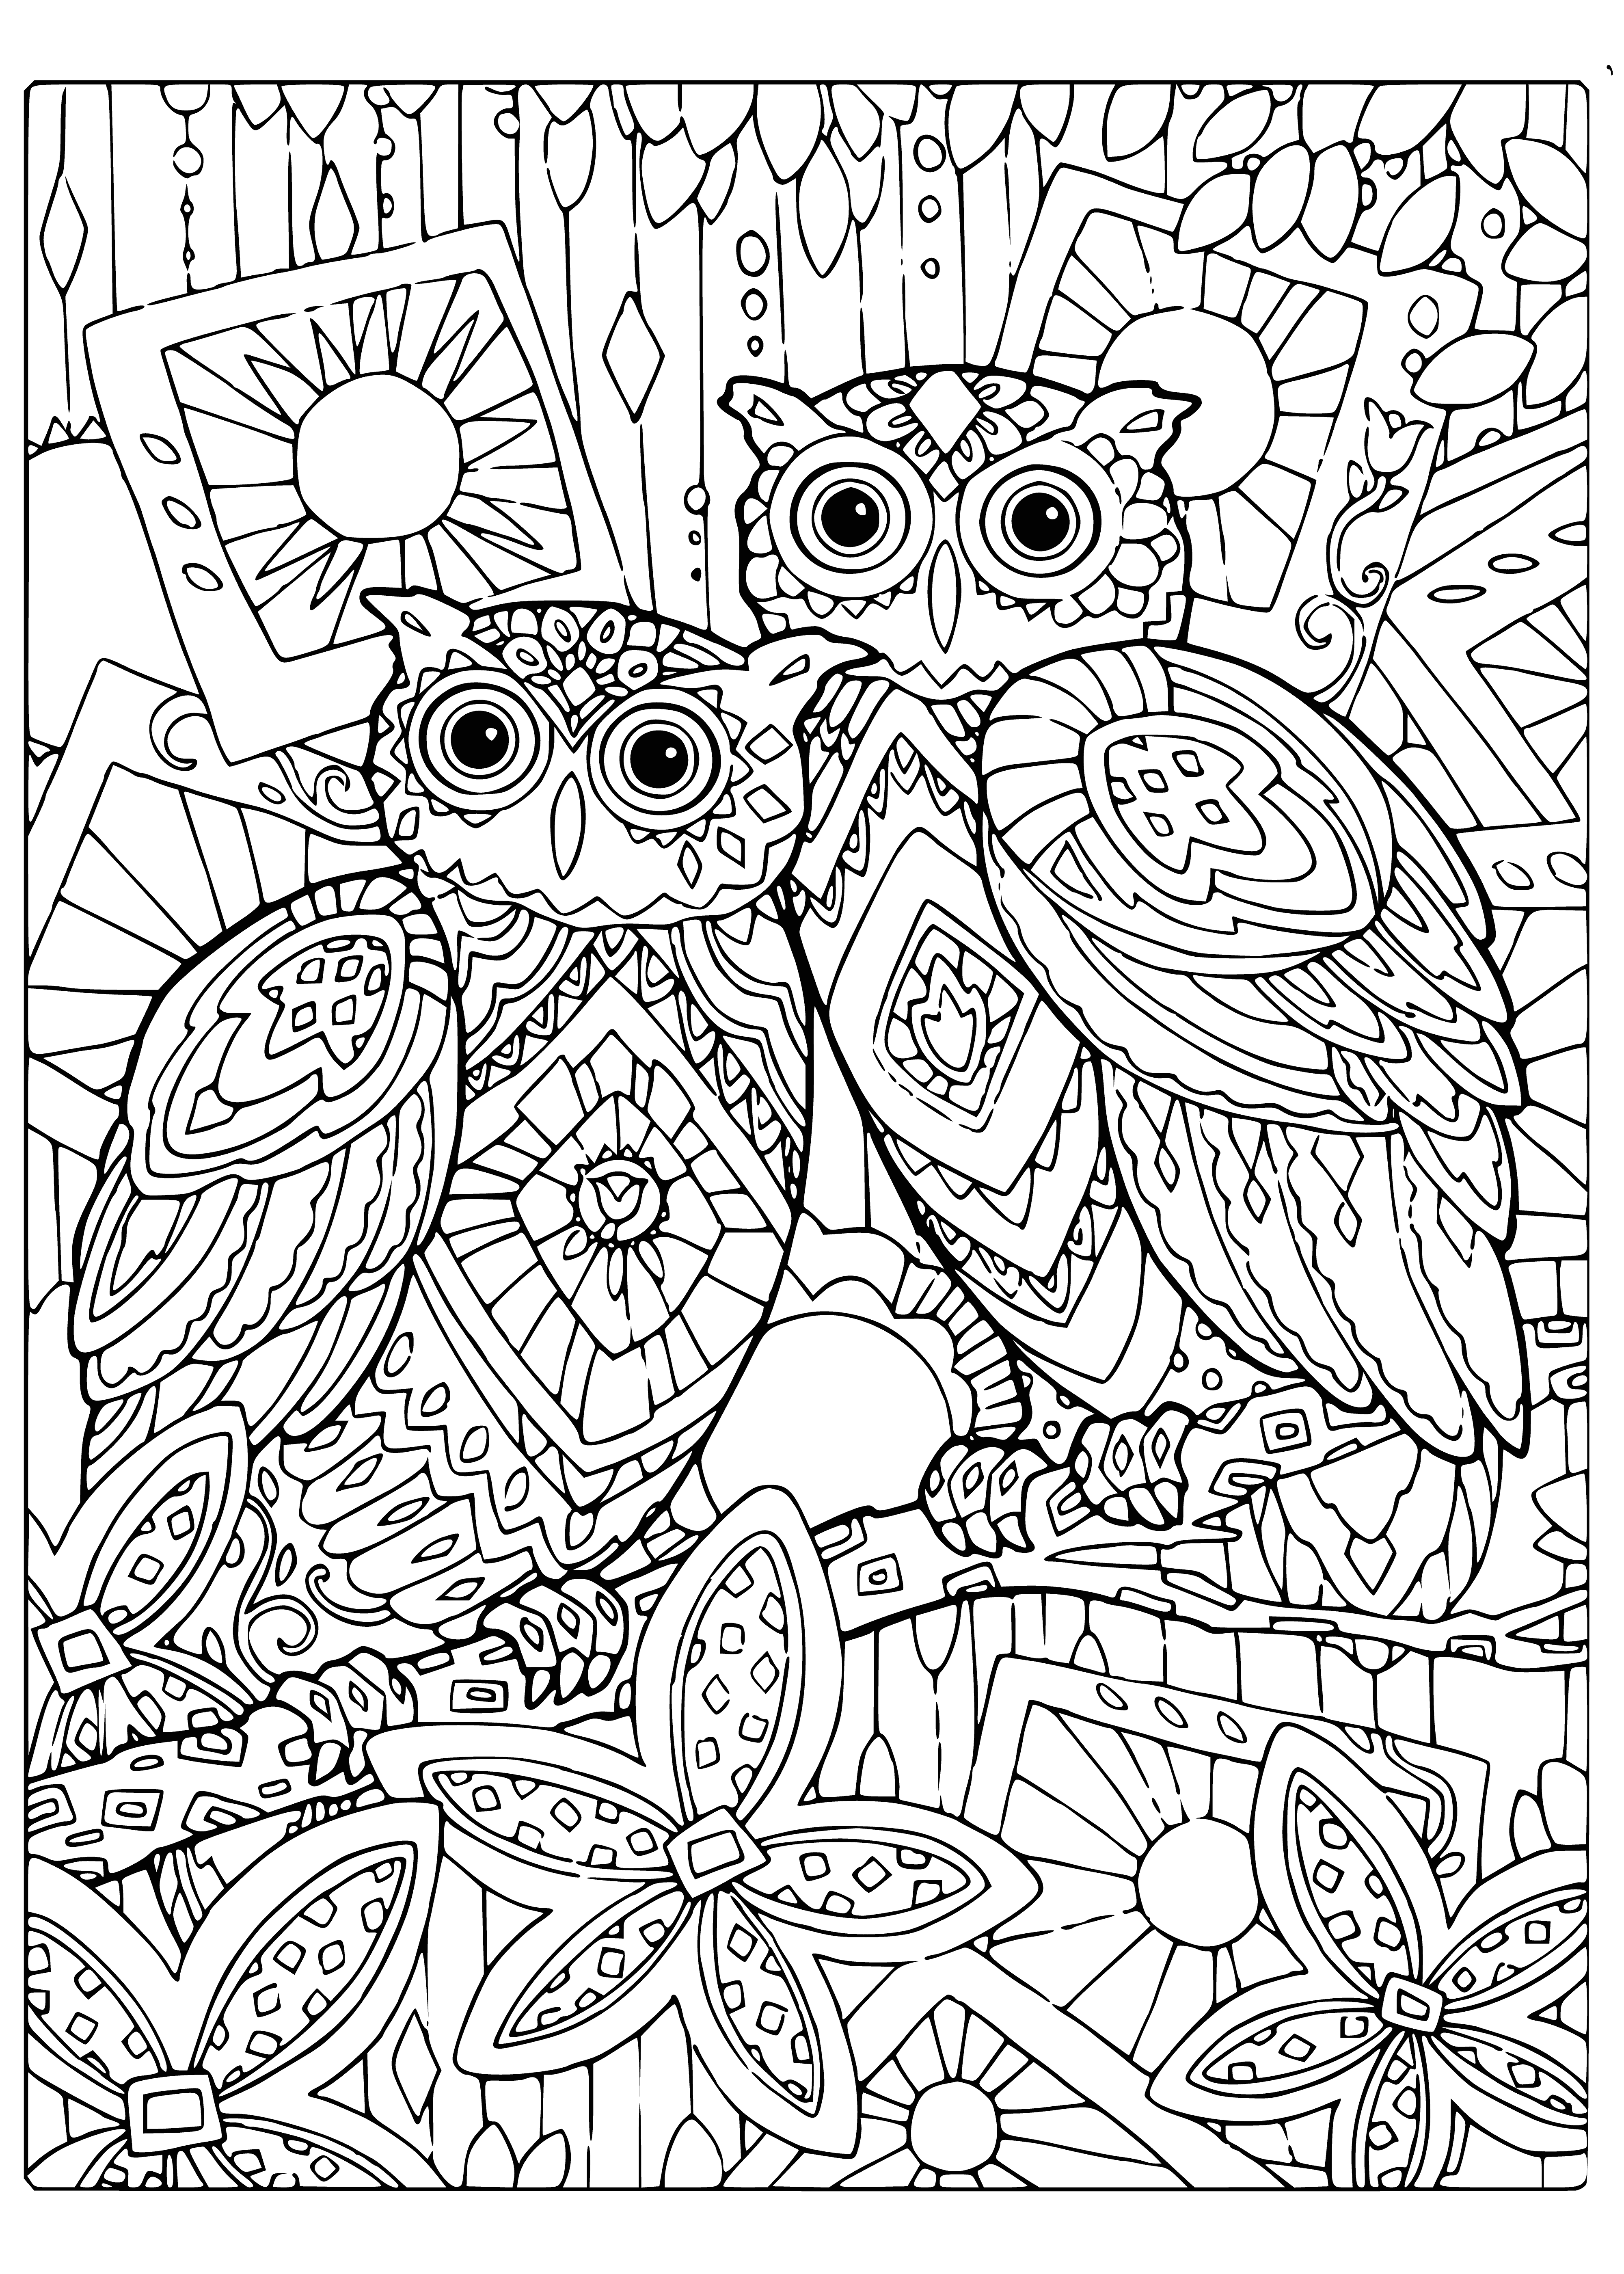 coloring page: Two owls perched on a tree branch, wings spread, looking off & down. Leaves green & yellow.